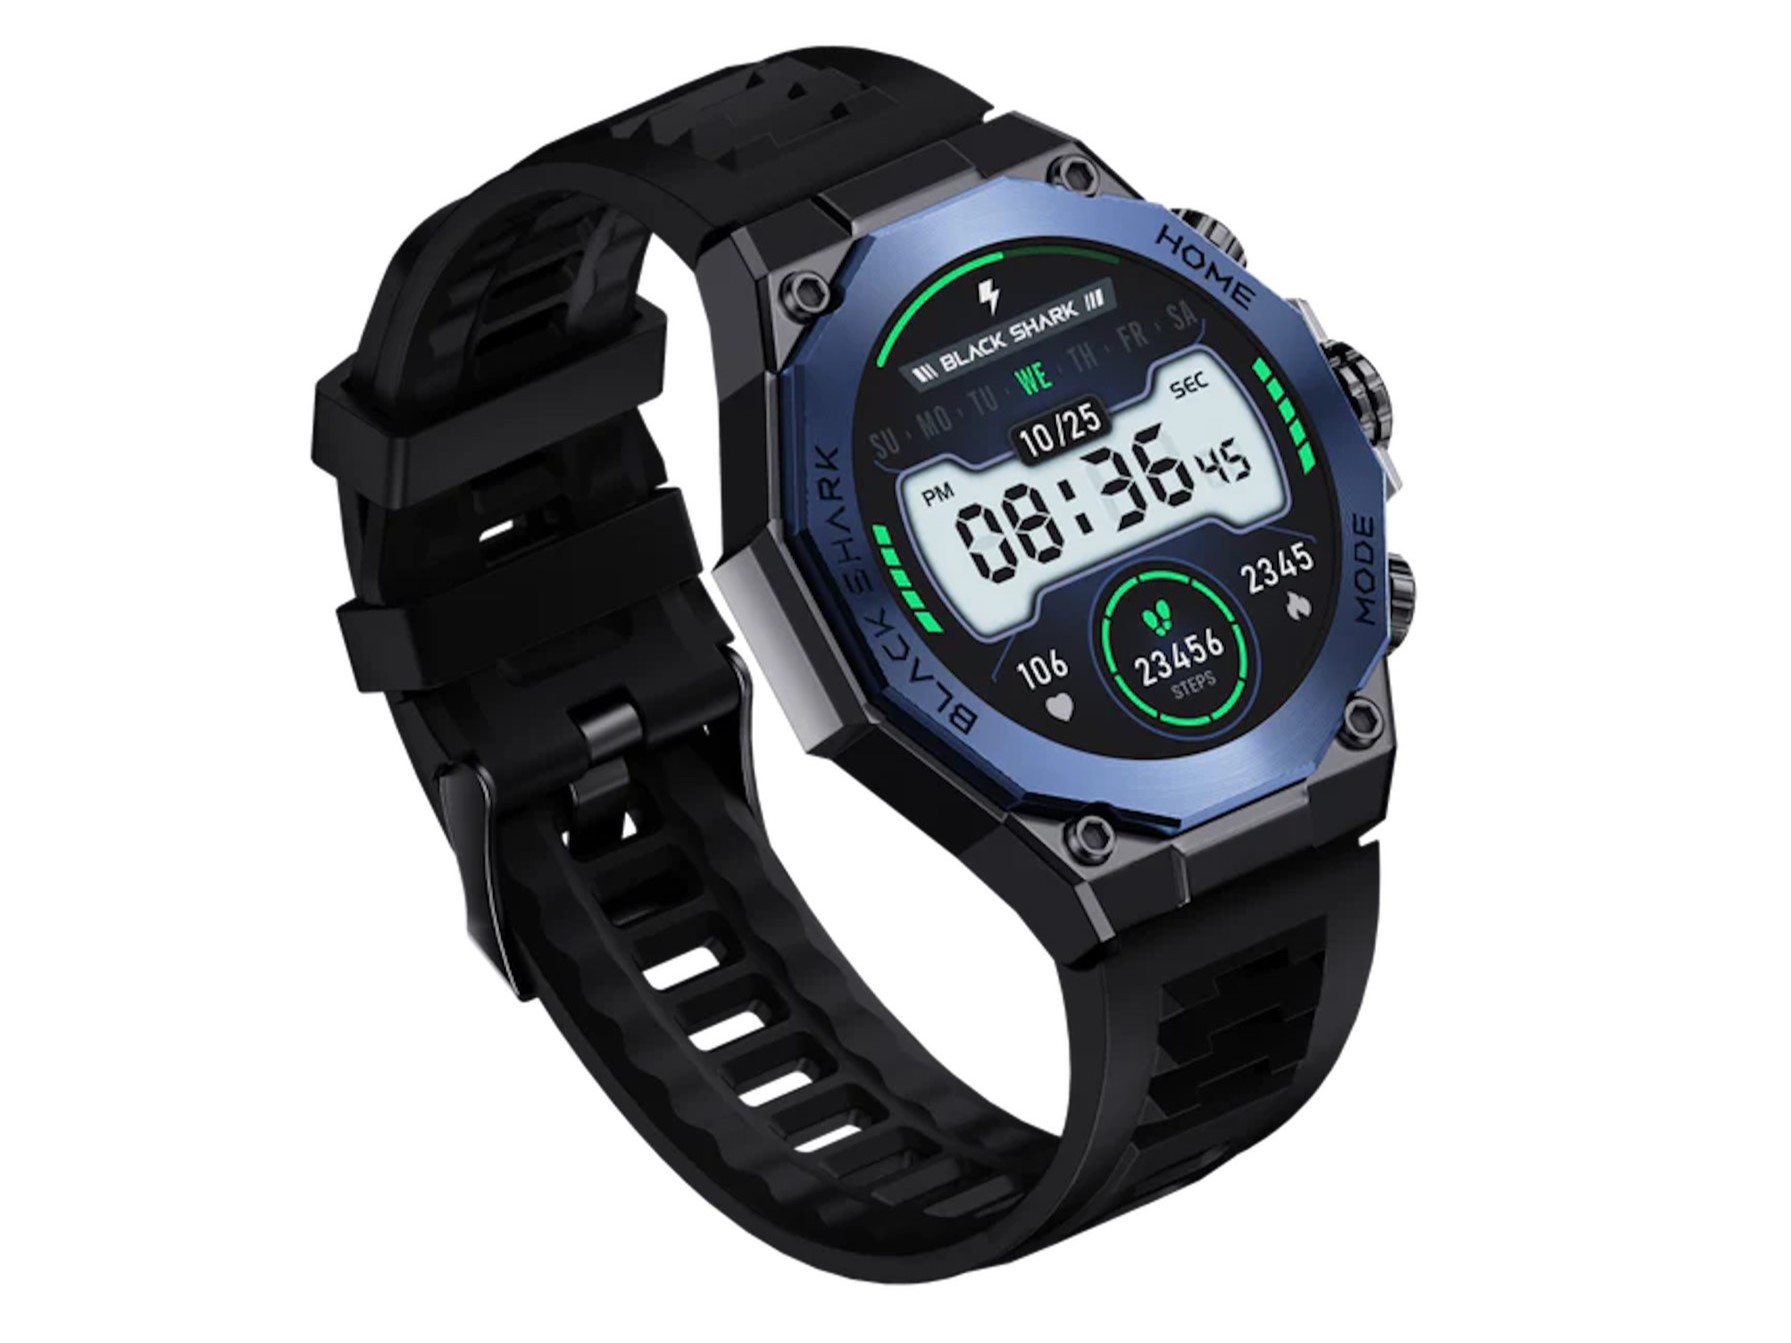 Xiaomi Black Shark S1 Pro: New AMOLED smartwatch launches in the USA and Europe at a very attractive price